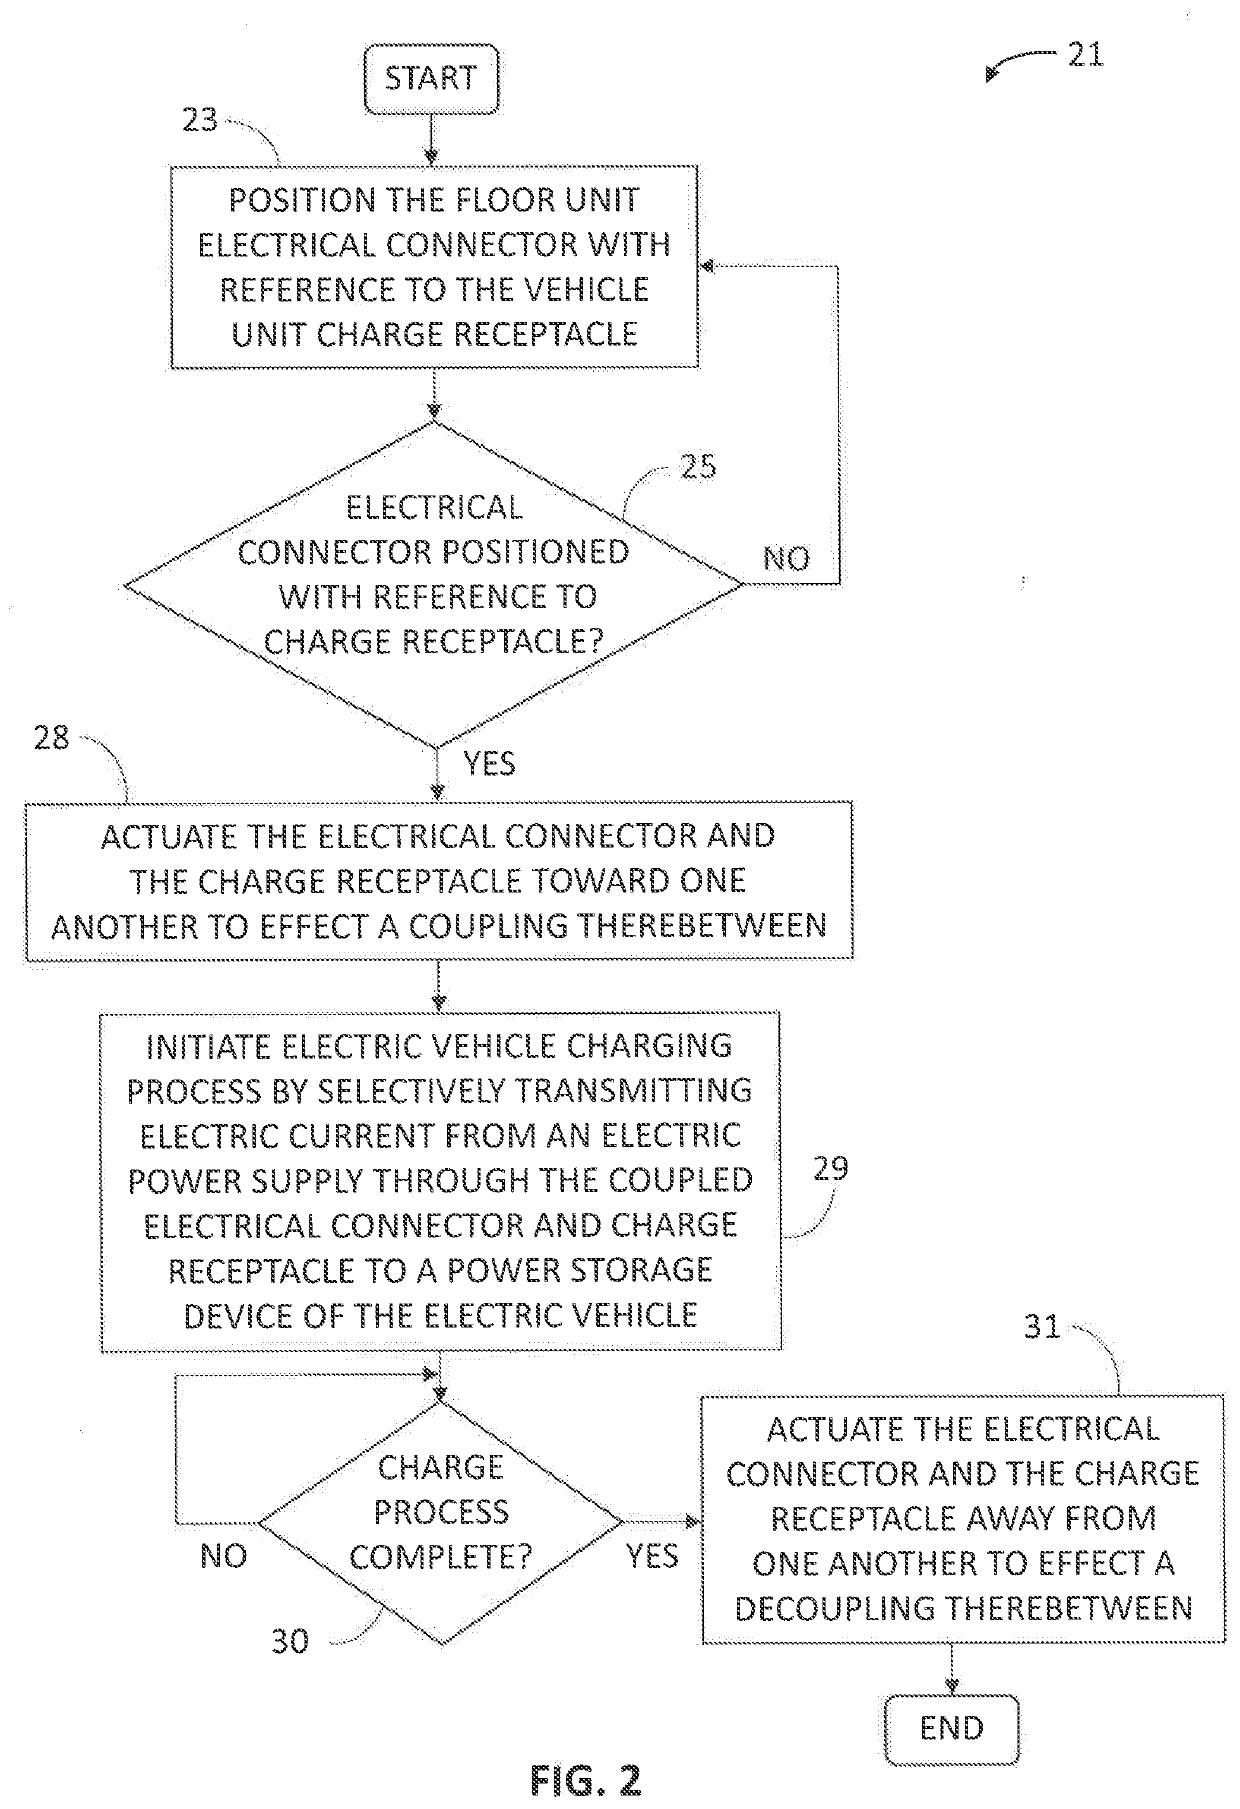 Systems and Methods for Underside Charging of Electrical Vehicles